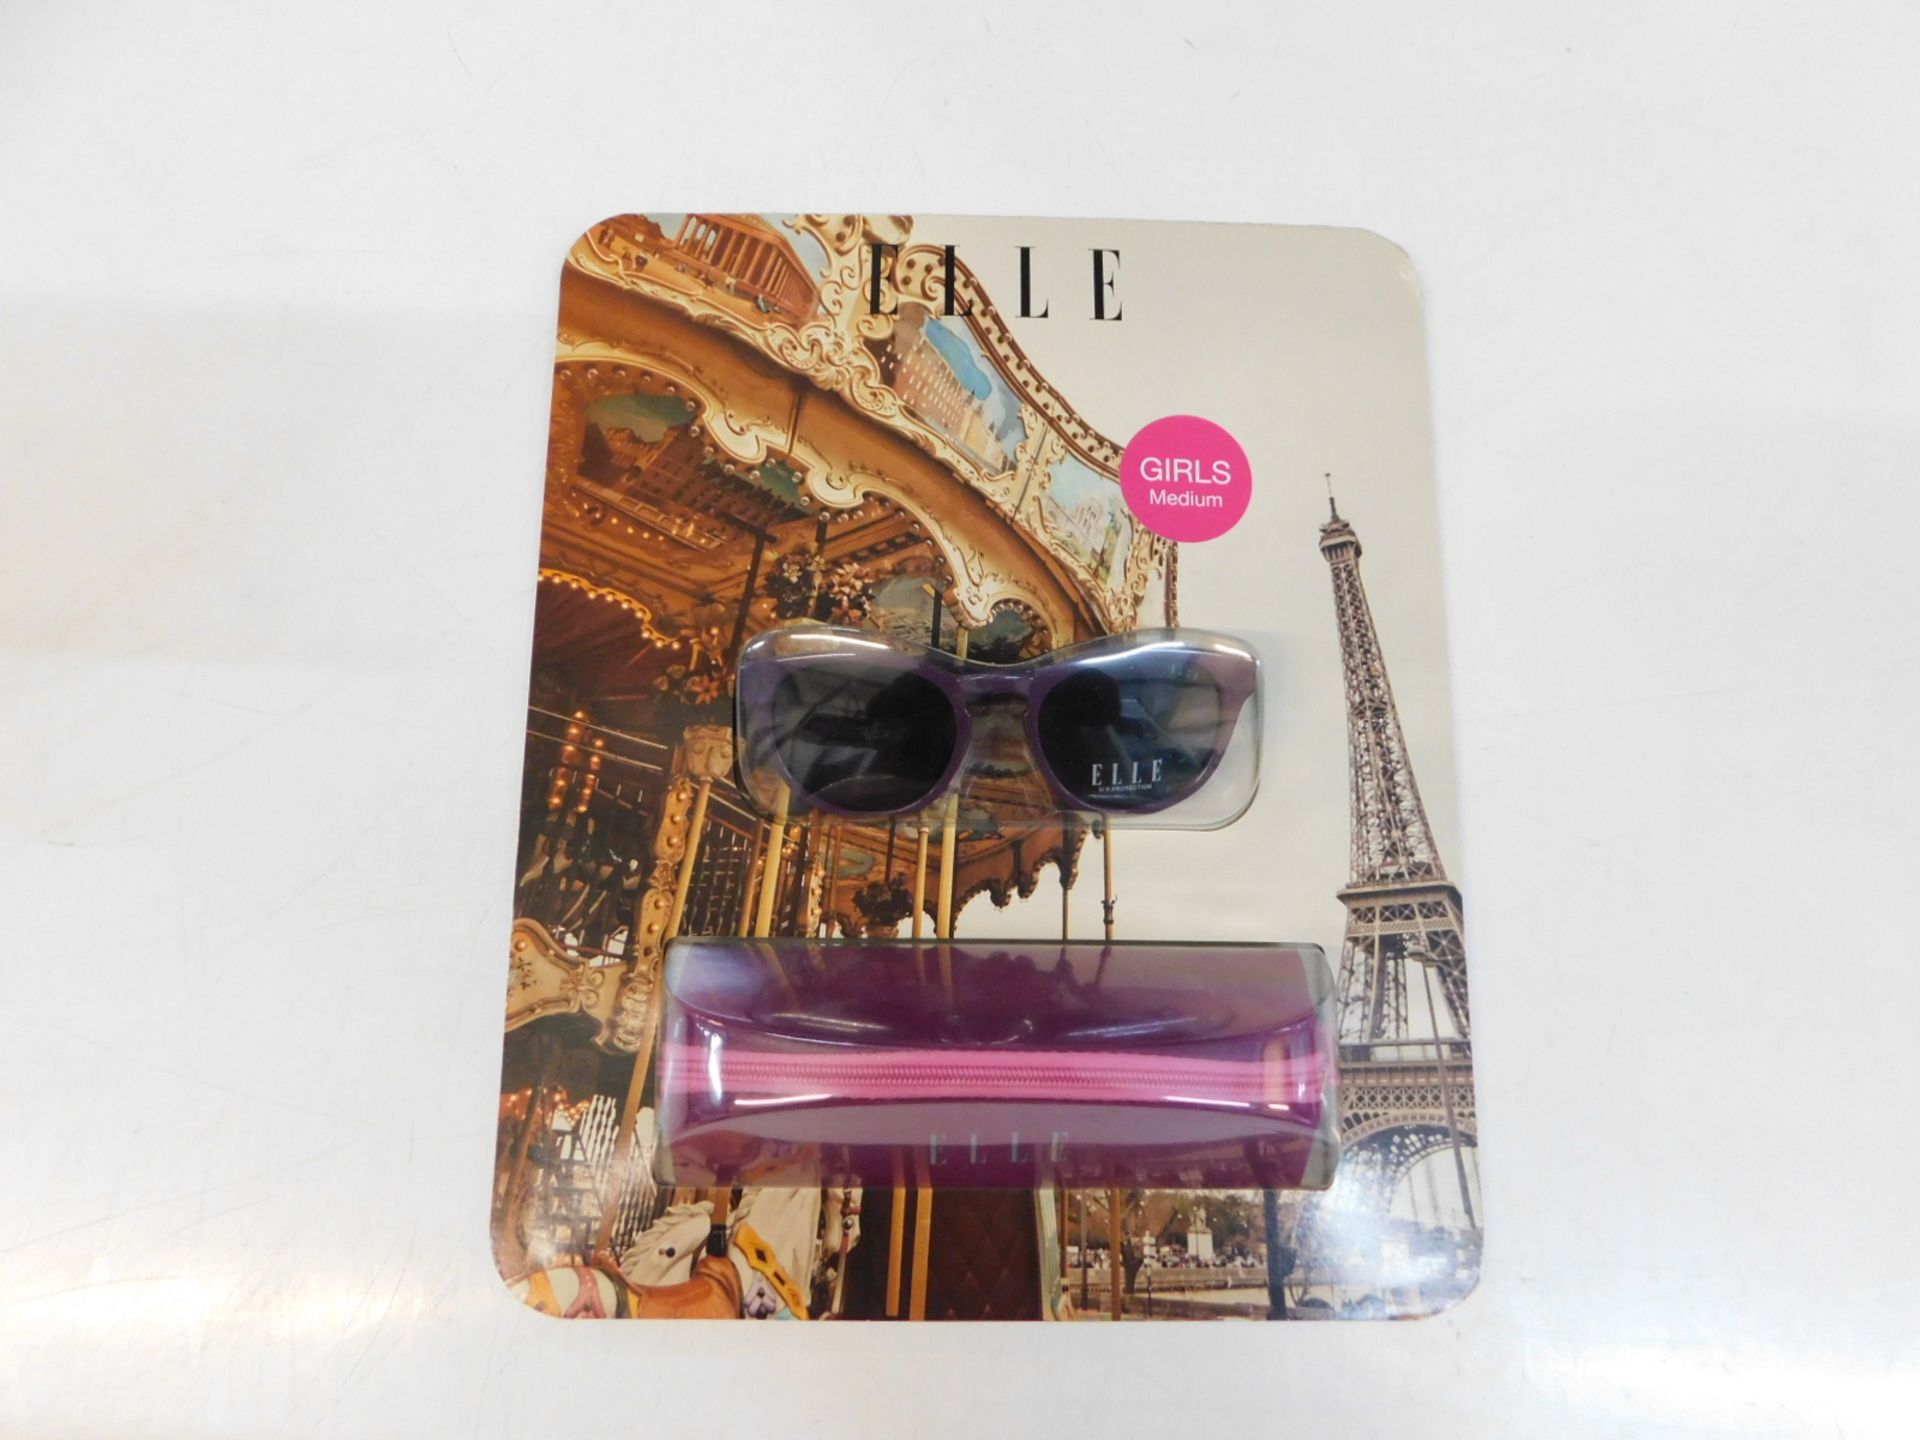 1 BRAND NEW PACK OF ELLE GILRS SUNGLASESS WITH CASE SIZE LARGE RRP Â£29.99